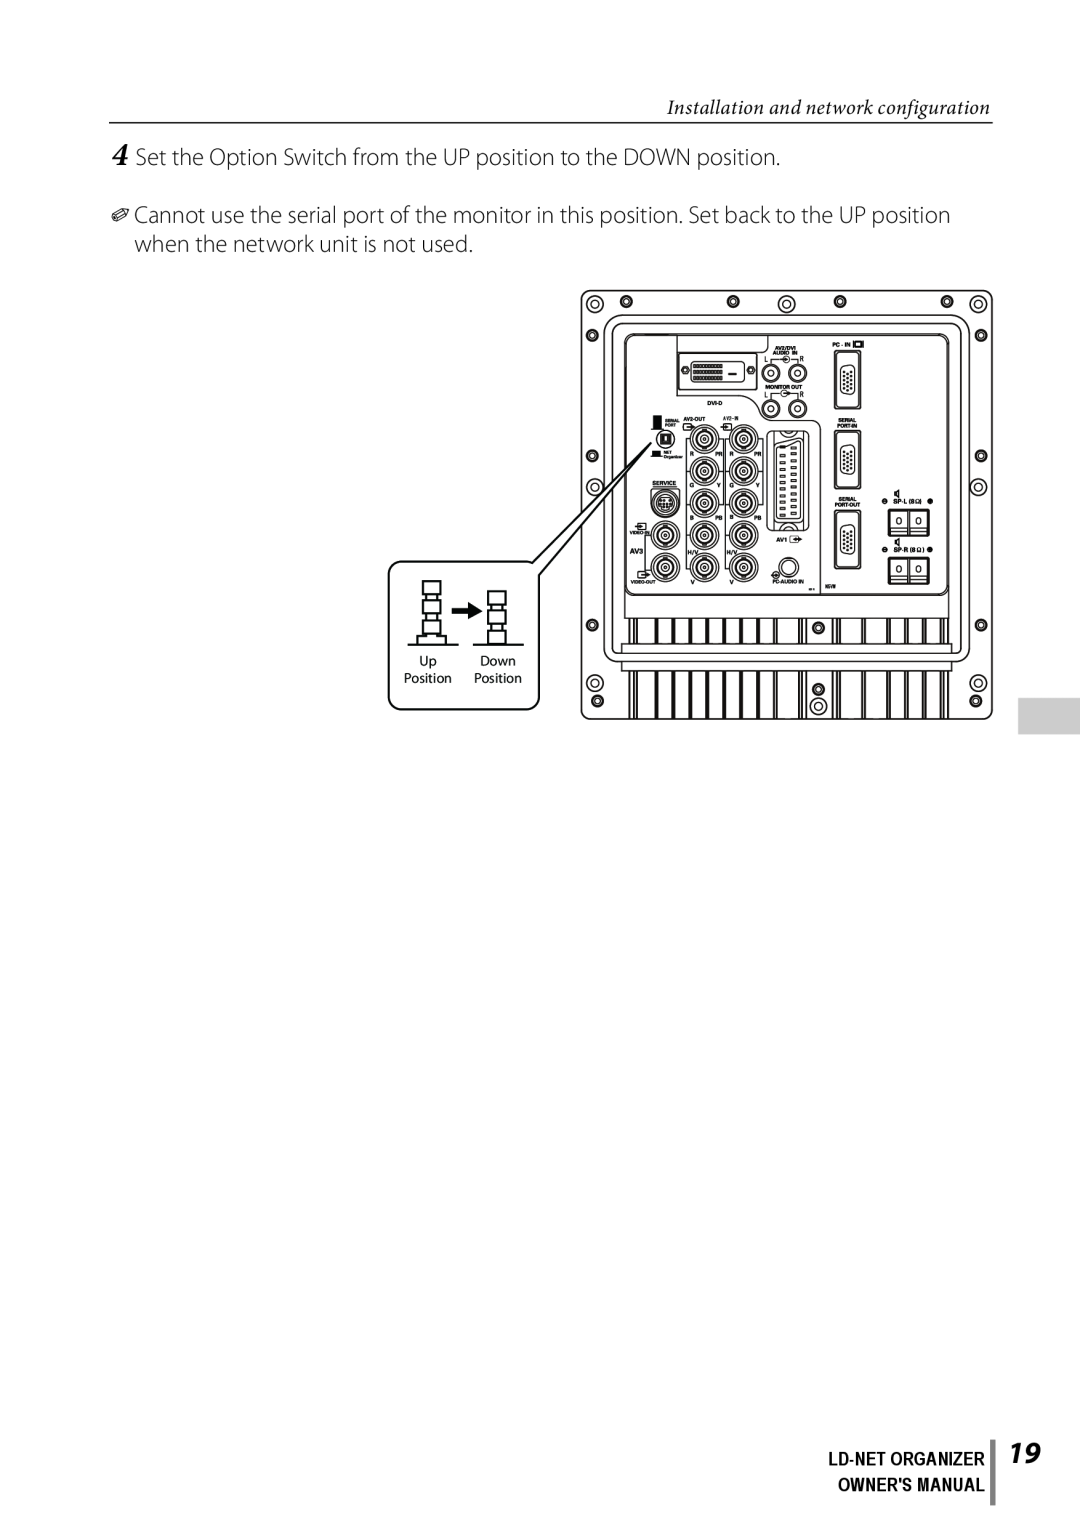 Sanyo POA-LN02 Set the Option Switch from the UP position to the DOWN position, Installation and network configuration 